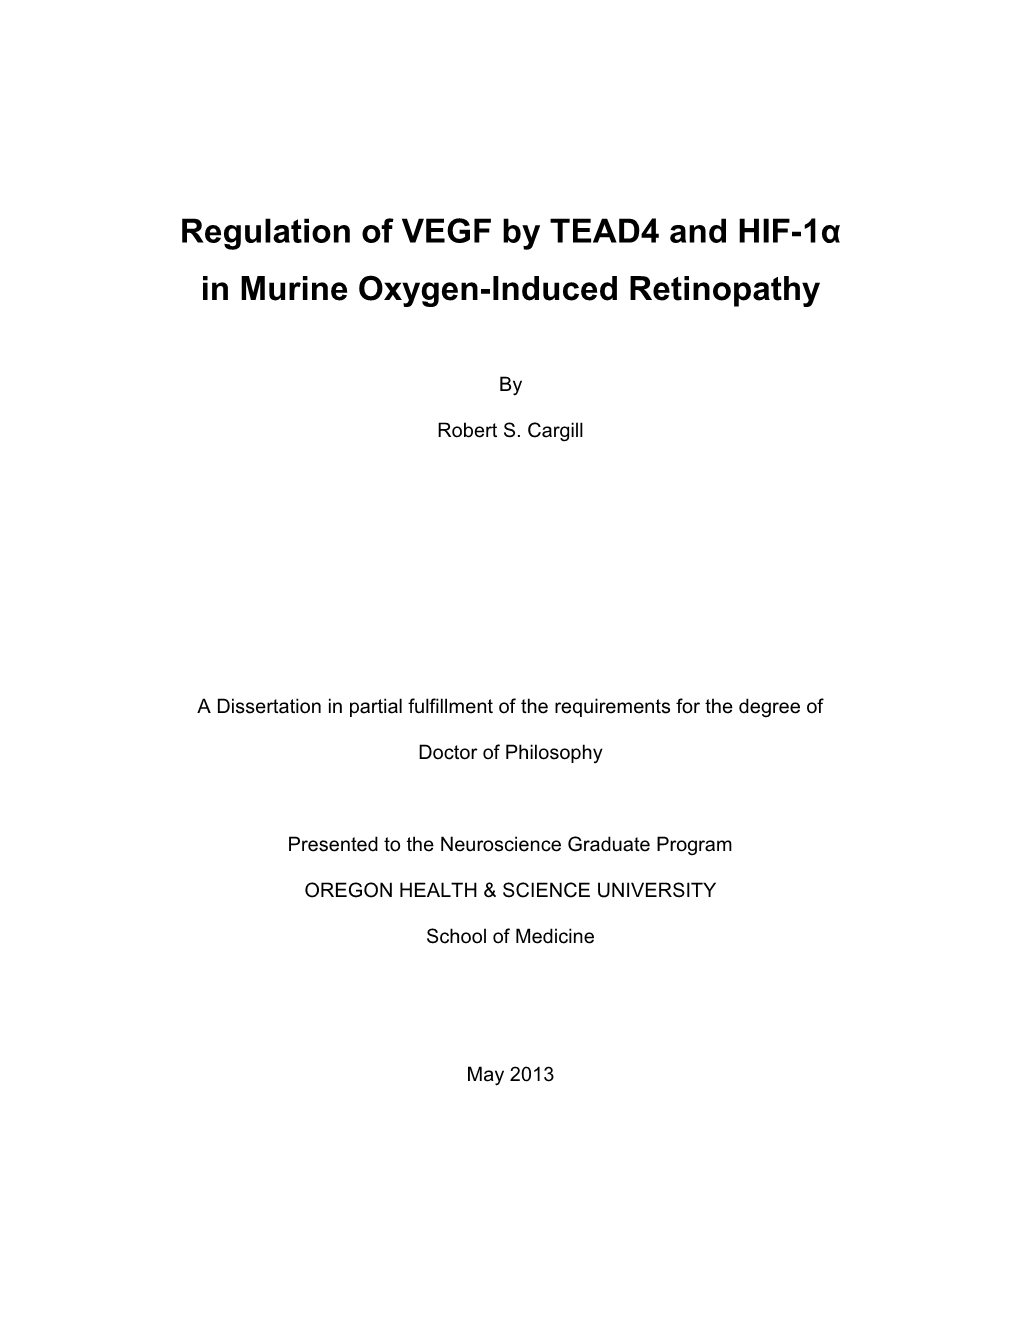 Regulation of VEGF by TEAD4 and HIF-1Α in Murine Oxygen-Induced Retinopathy